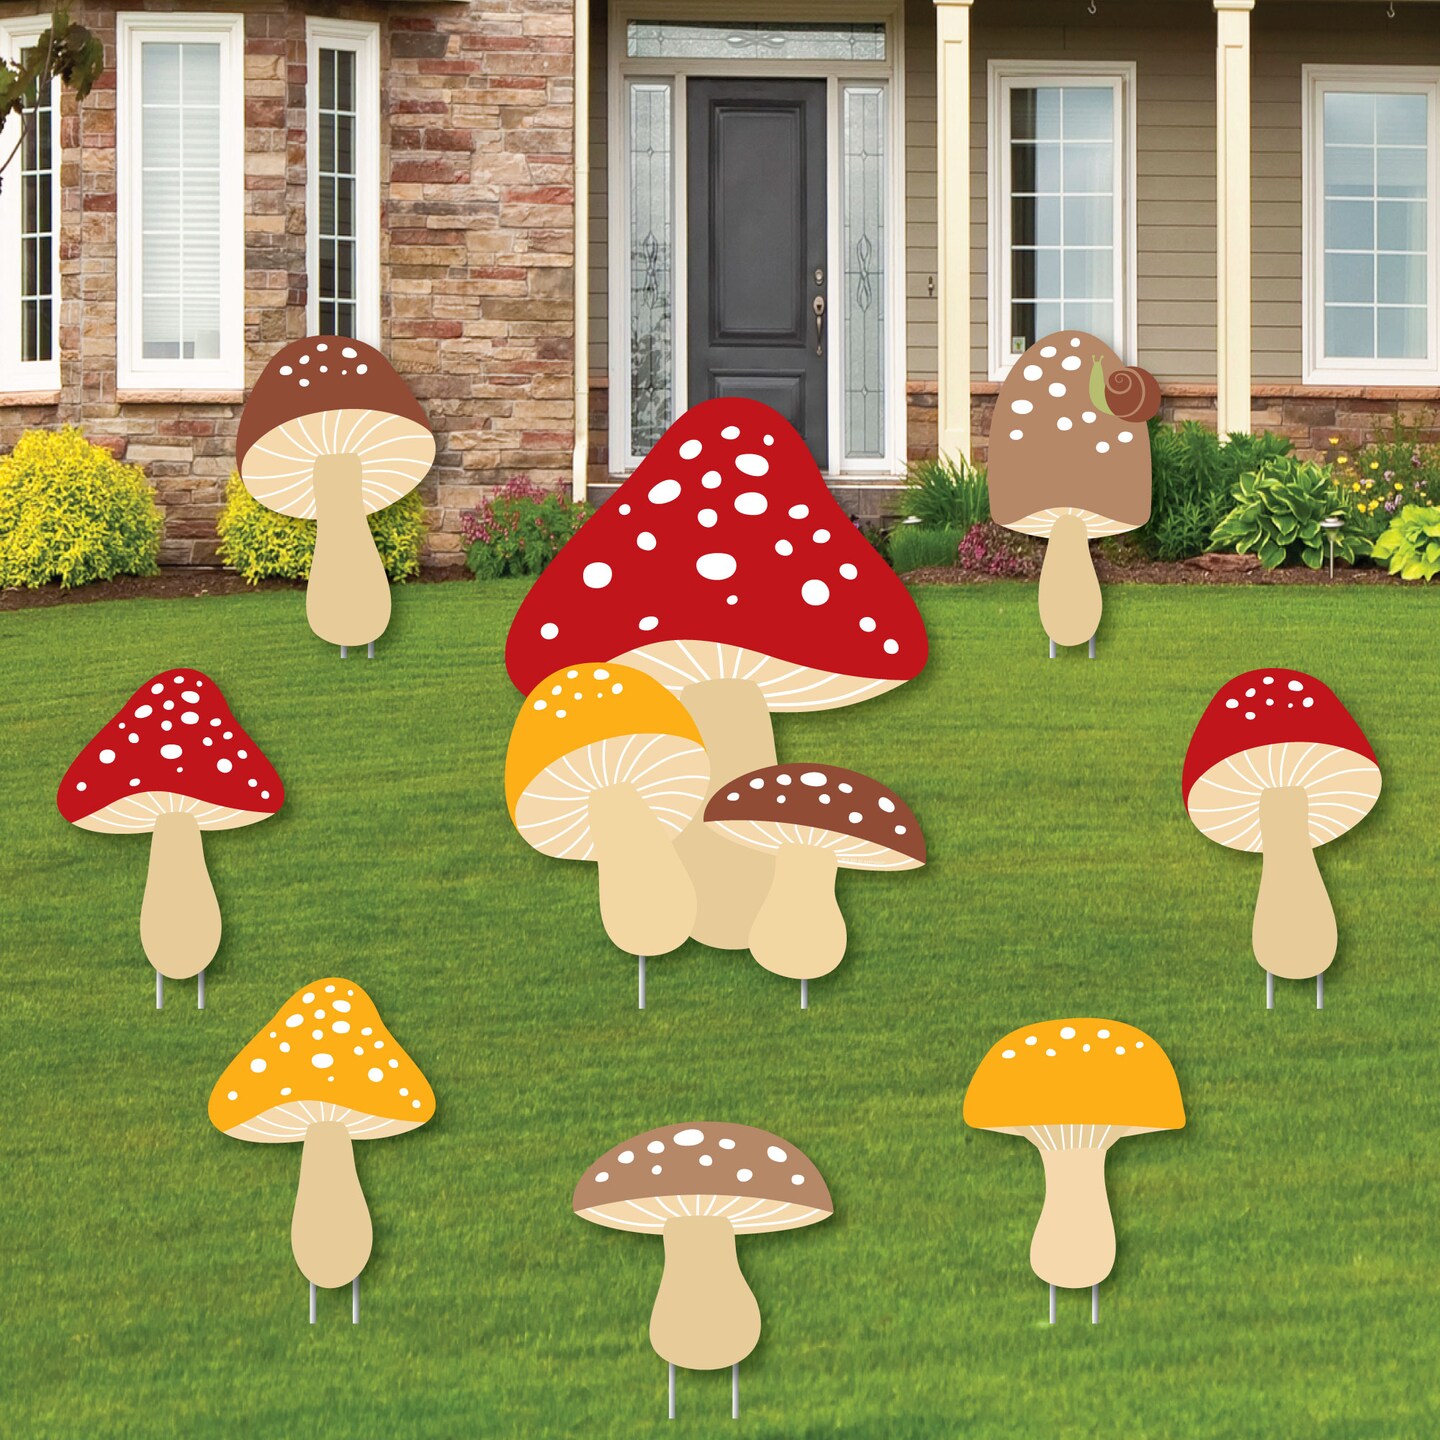 Big Dot of Happiness Wild Mushrooms - Yard Sign and Outdoor Lawn Decorations - Red Toadstool Decor and Party Yard Signs - Set of 8